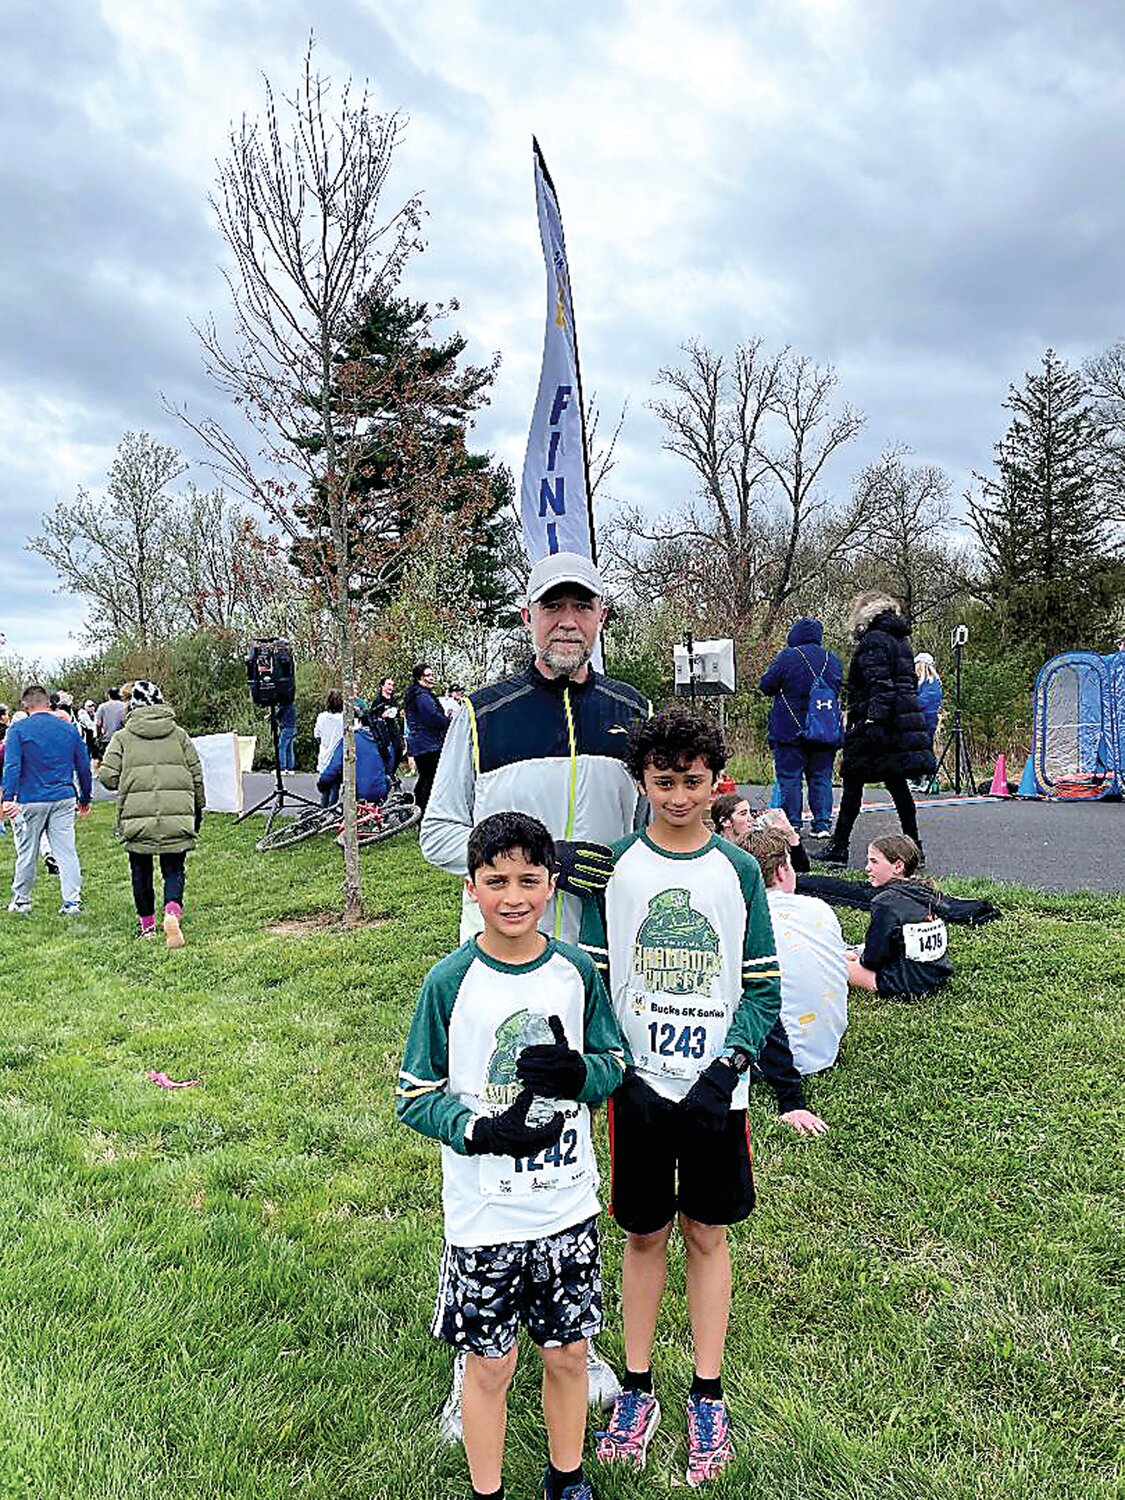 Stan Brownell stands with his two boys, Alric, left, and Avery, right, after Saturday’s Be Kind 5K at Holicong Park in Buckingham Township.